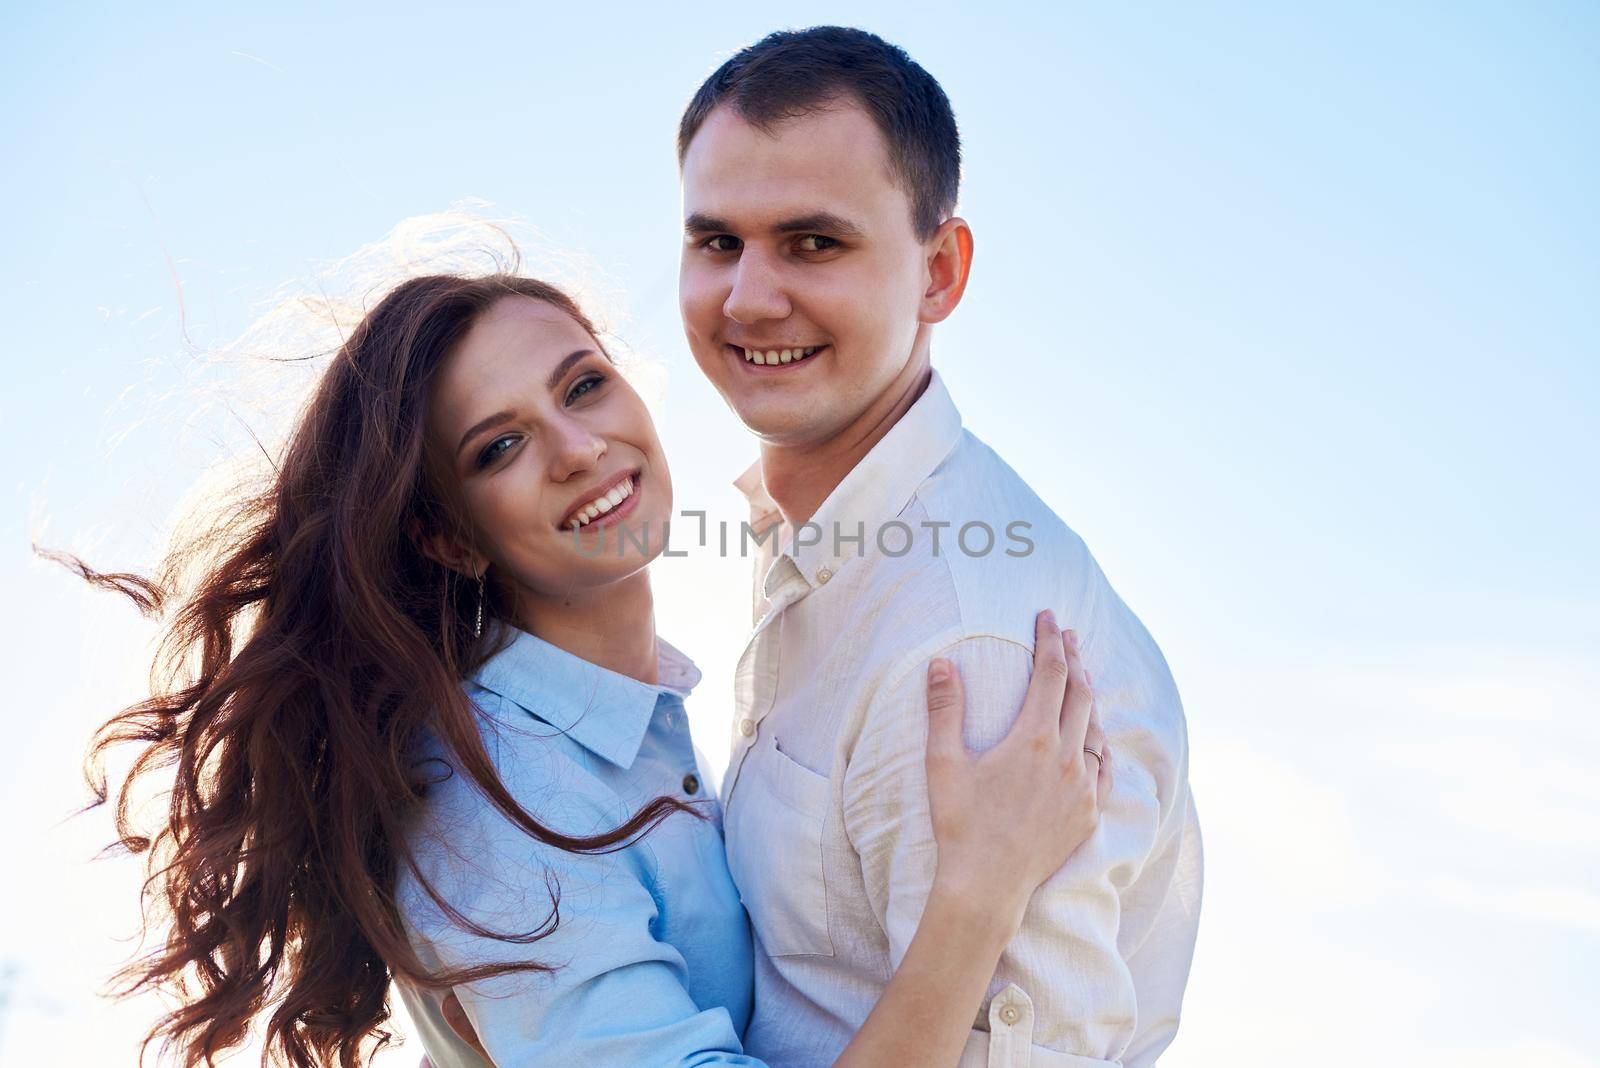 Awesome happy couple have fun in a field sunset background. Lifestyle and travel concept.